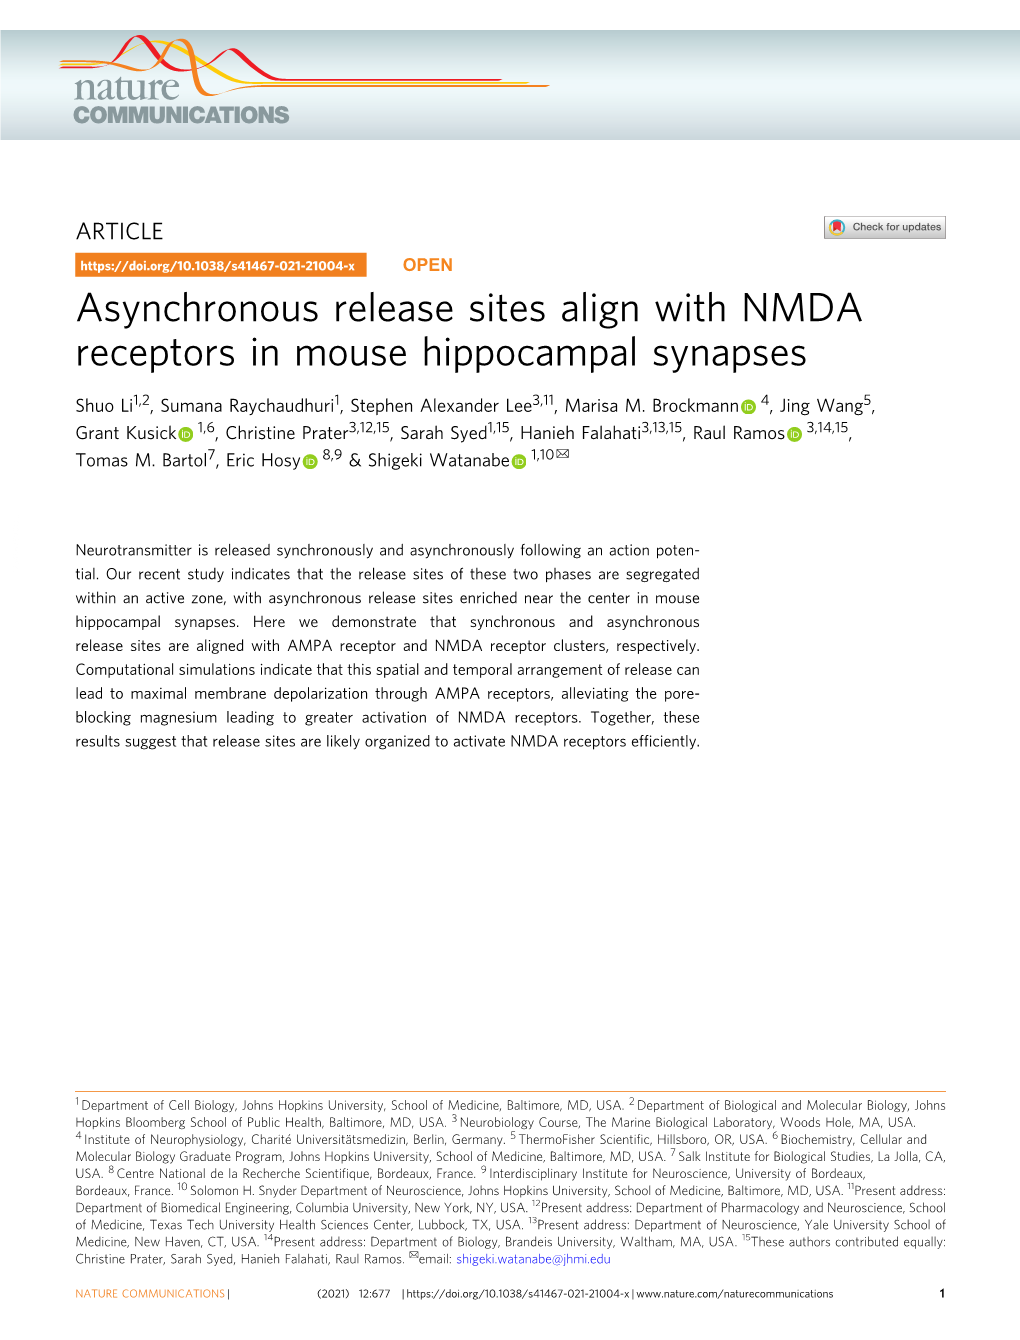 Asynchronous Release Sites Align with NMDA Receptors in Mouse Hippocampal Synapses